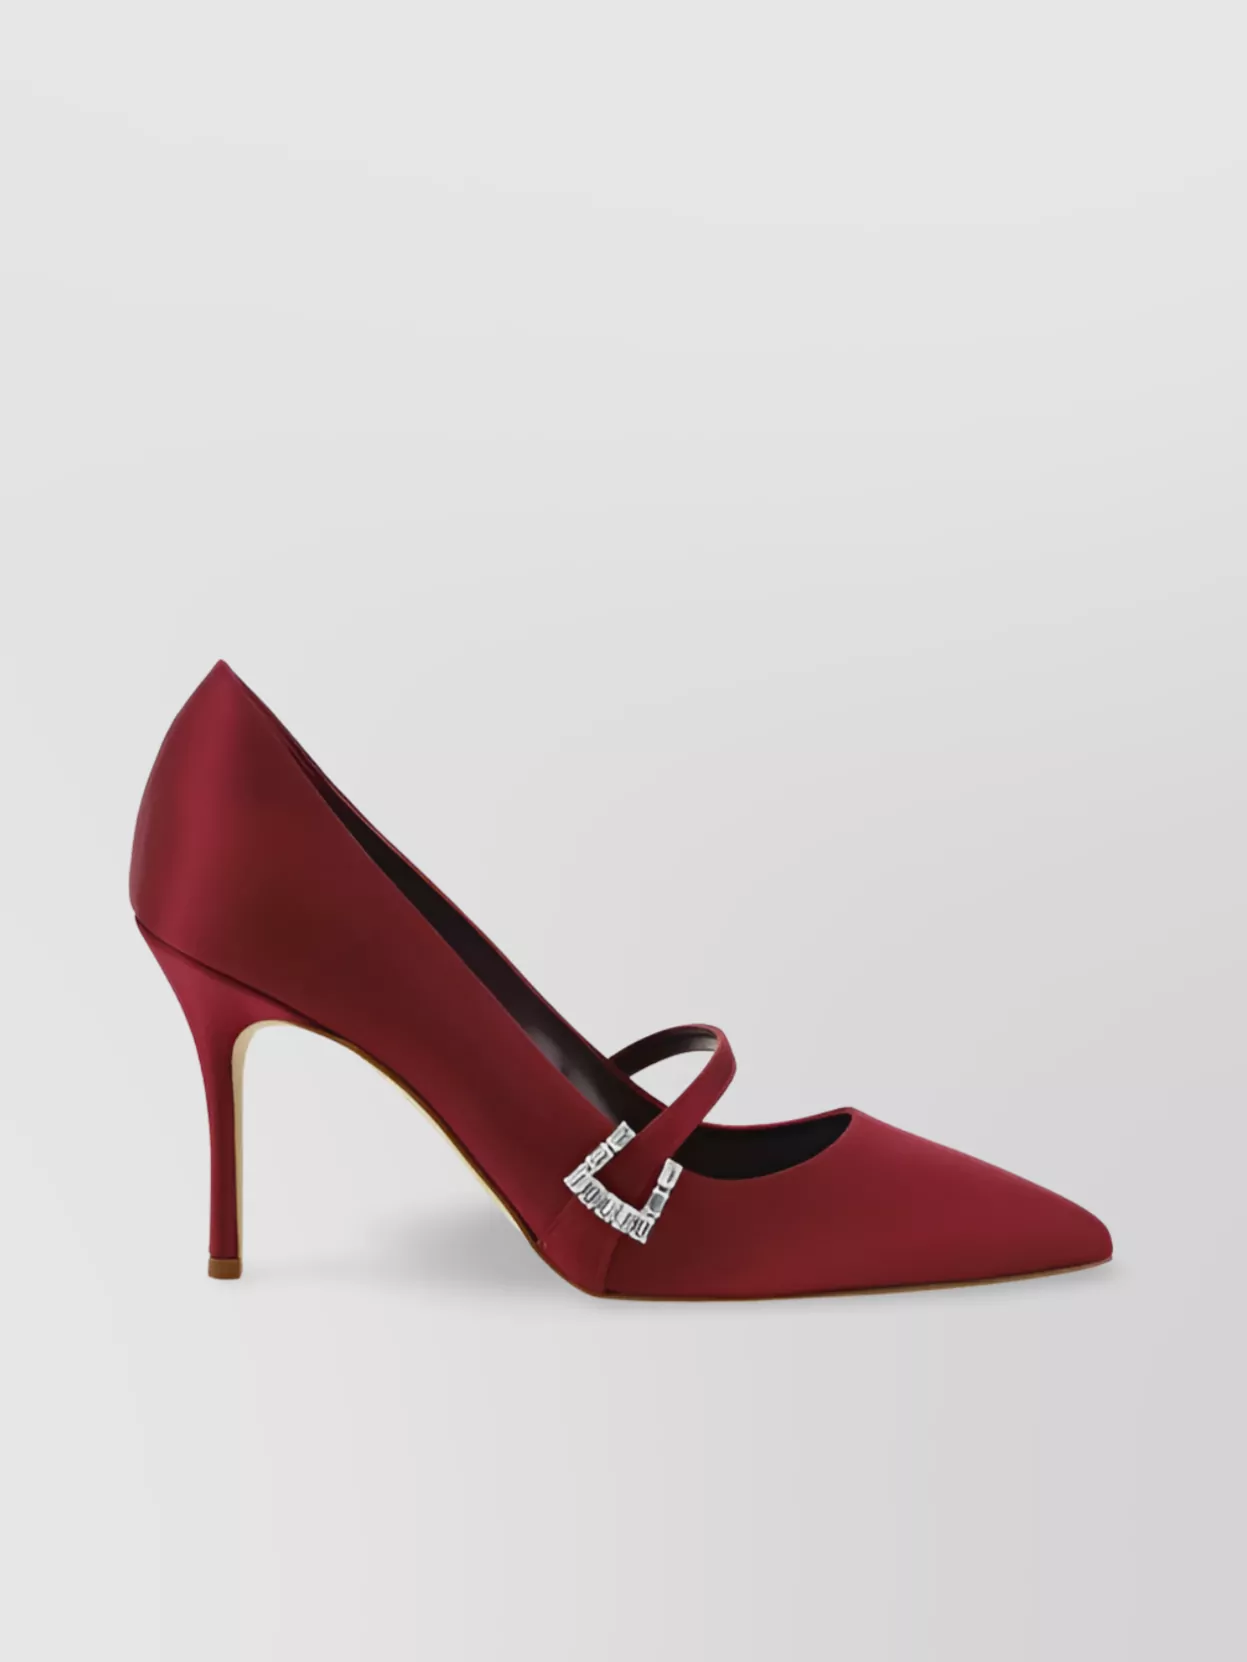 Manolo Blahnik Shiny Buckle Almond Toe Leather Pumps In Red